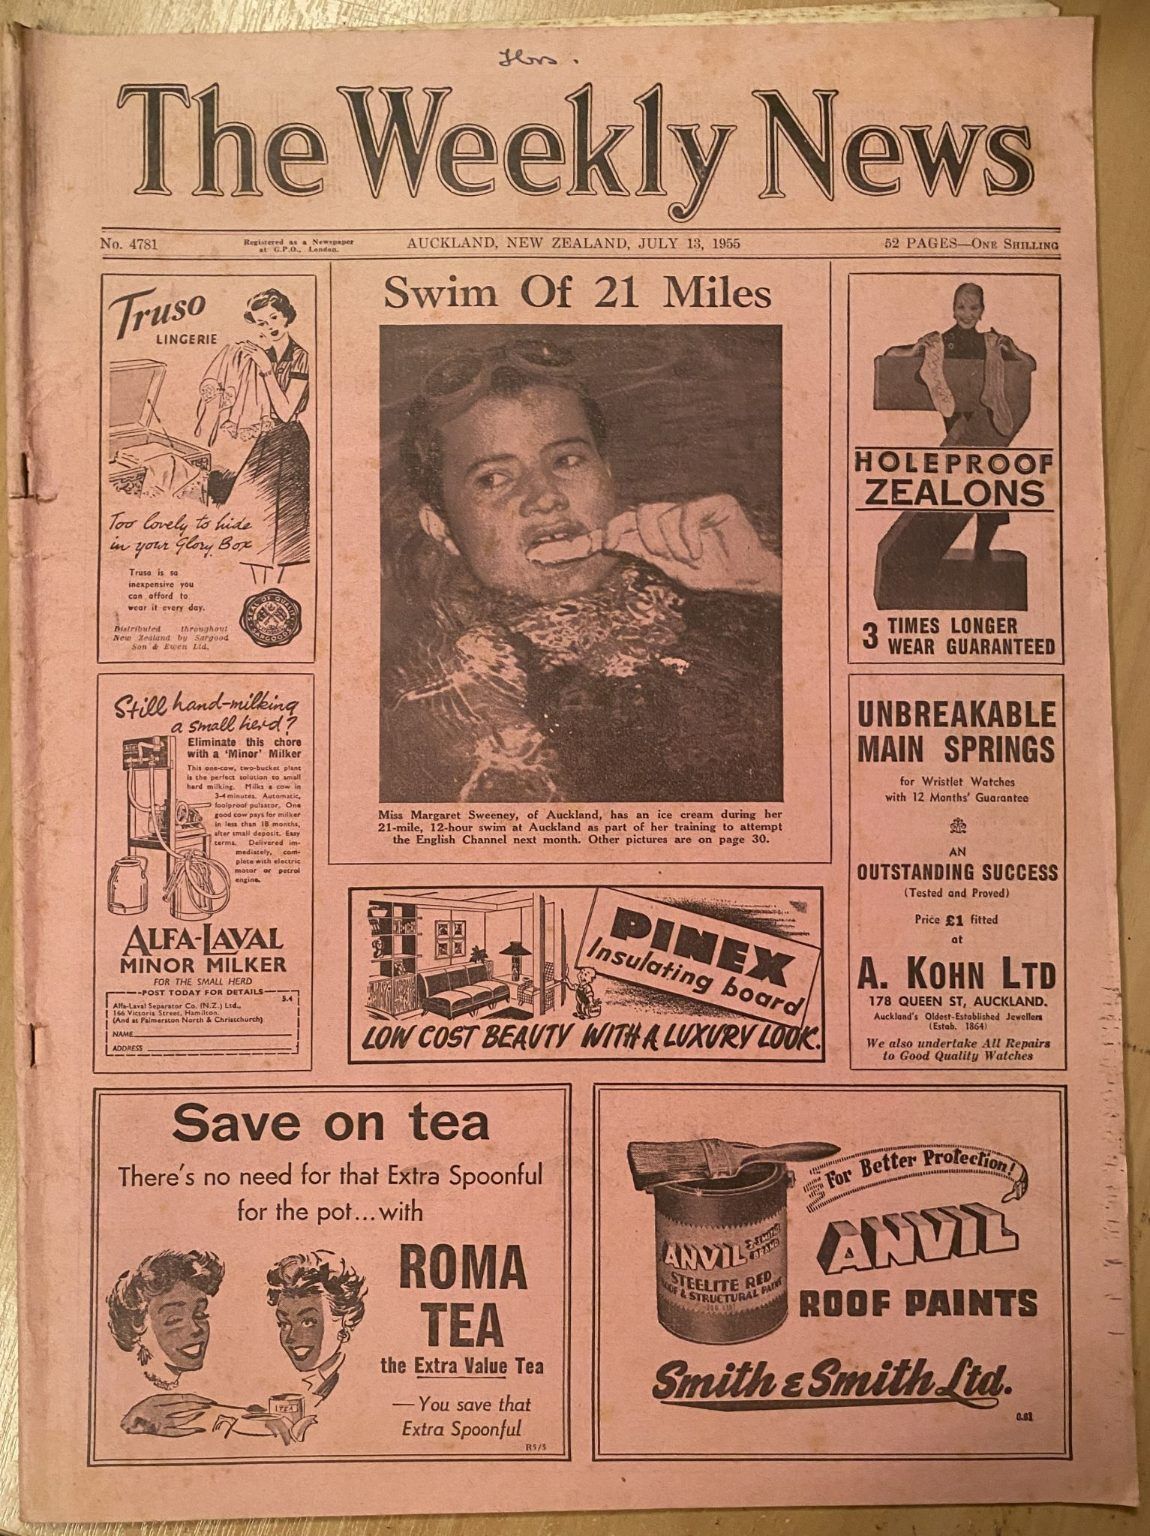 OLD NEWSPAPER: The Weekly News - No. 4781, 13 July 1955